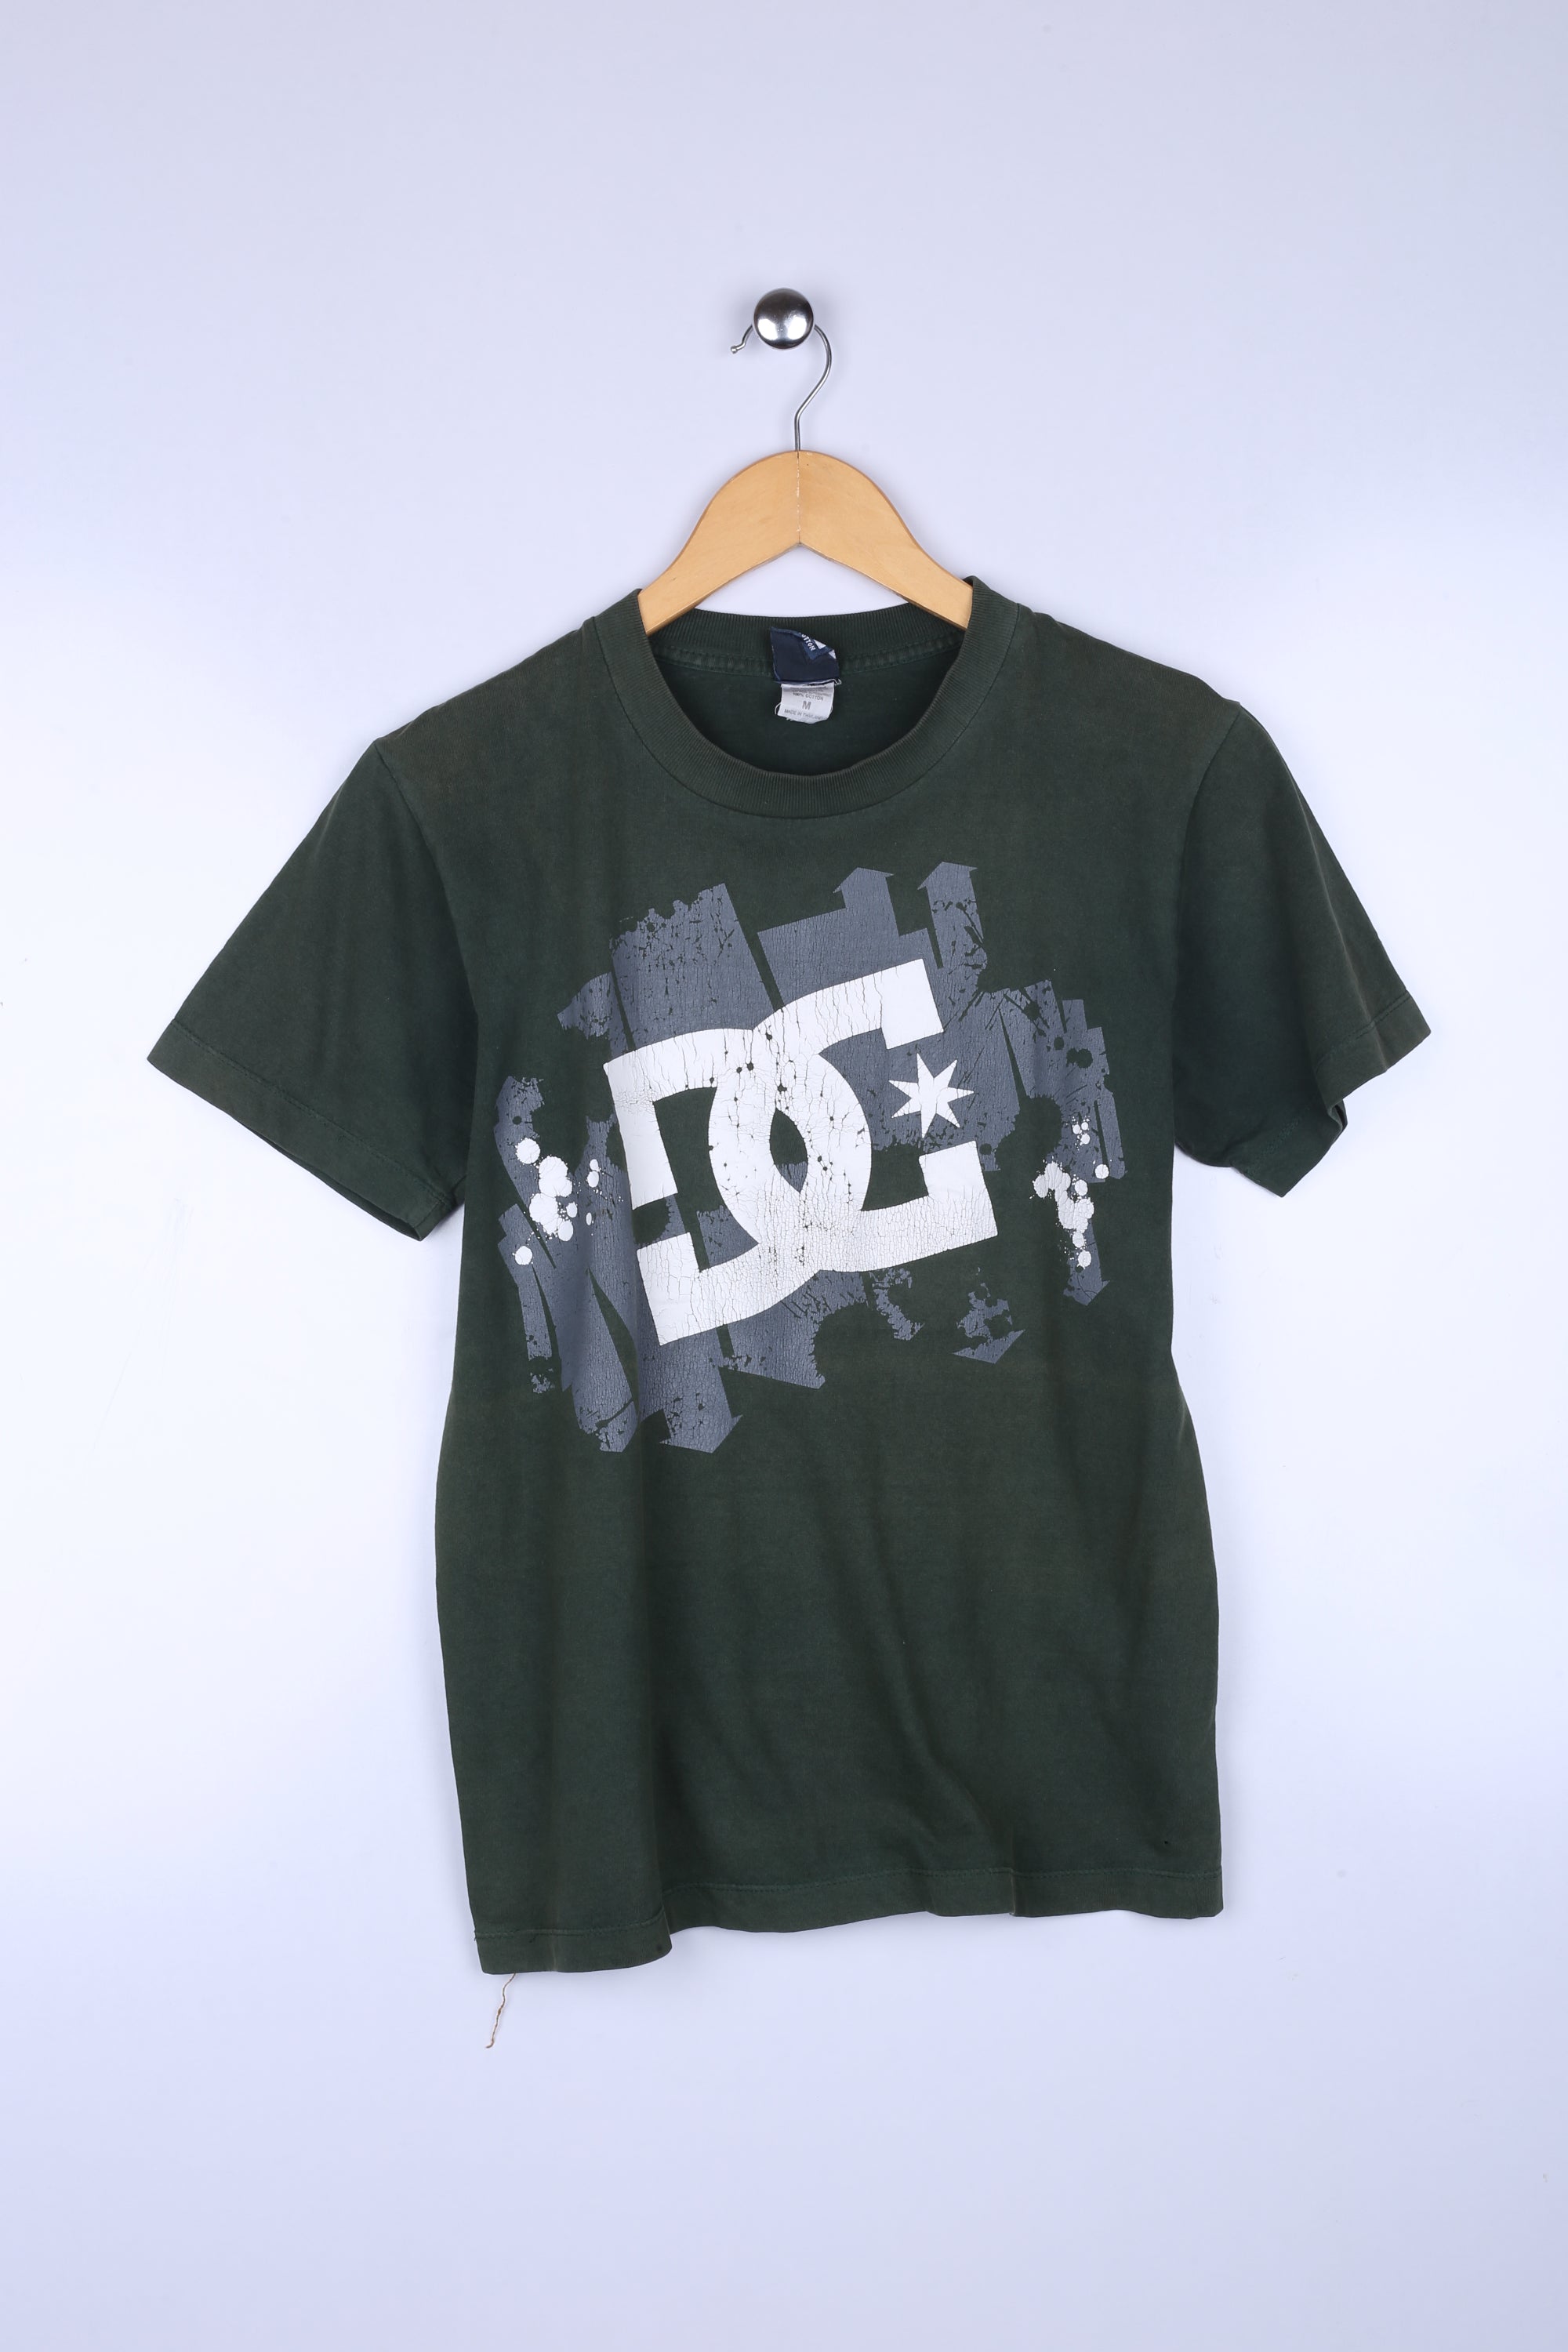 Vintage DC Tee Green Small